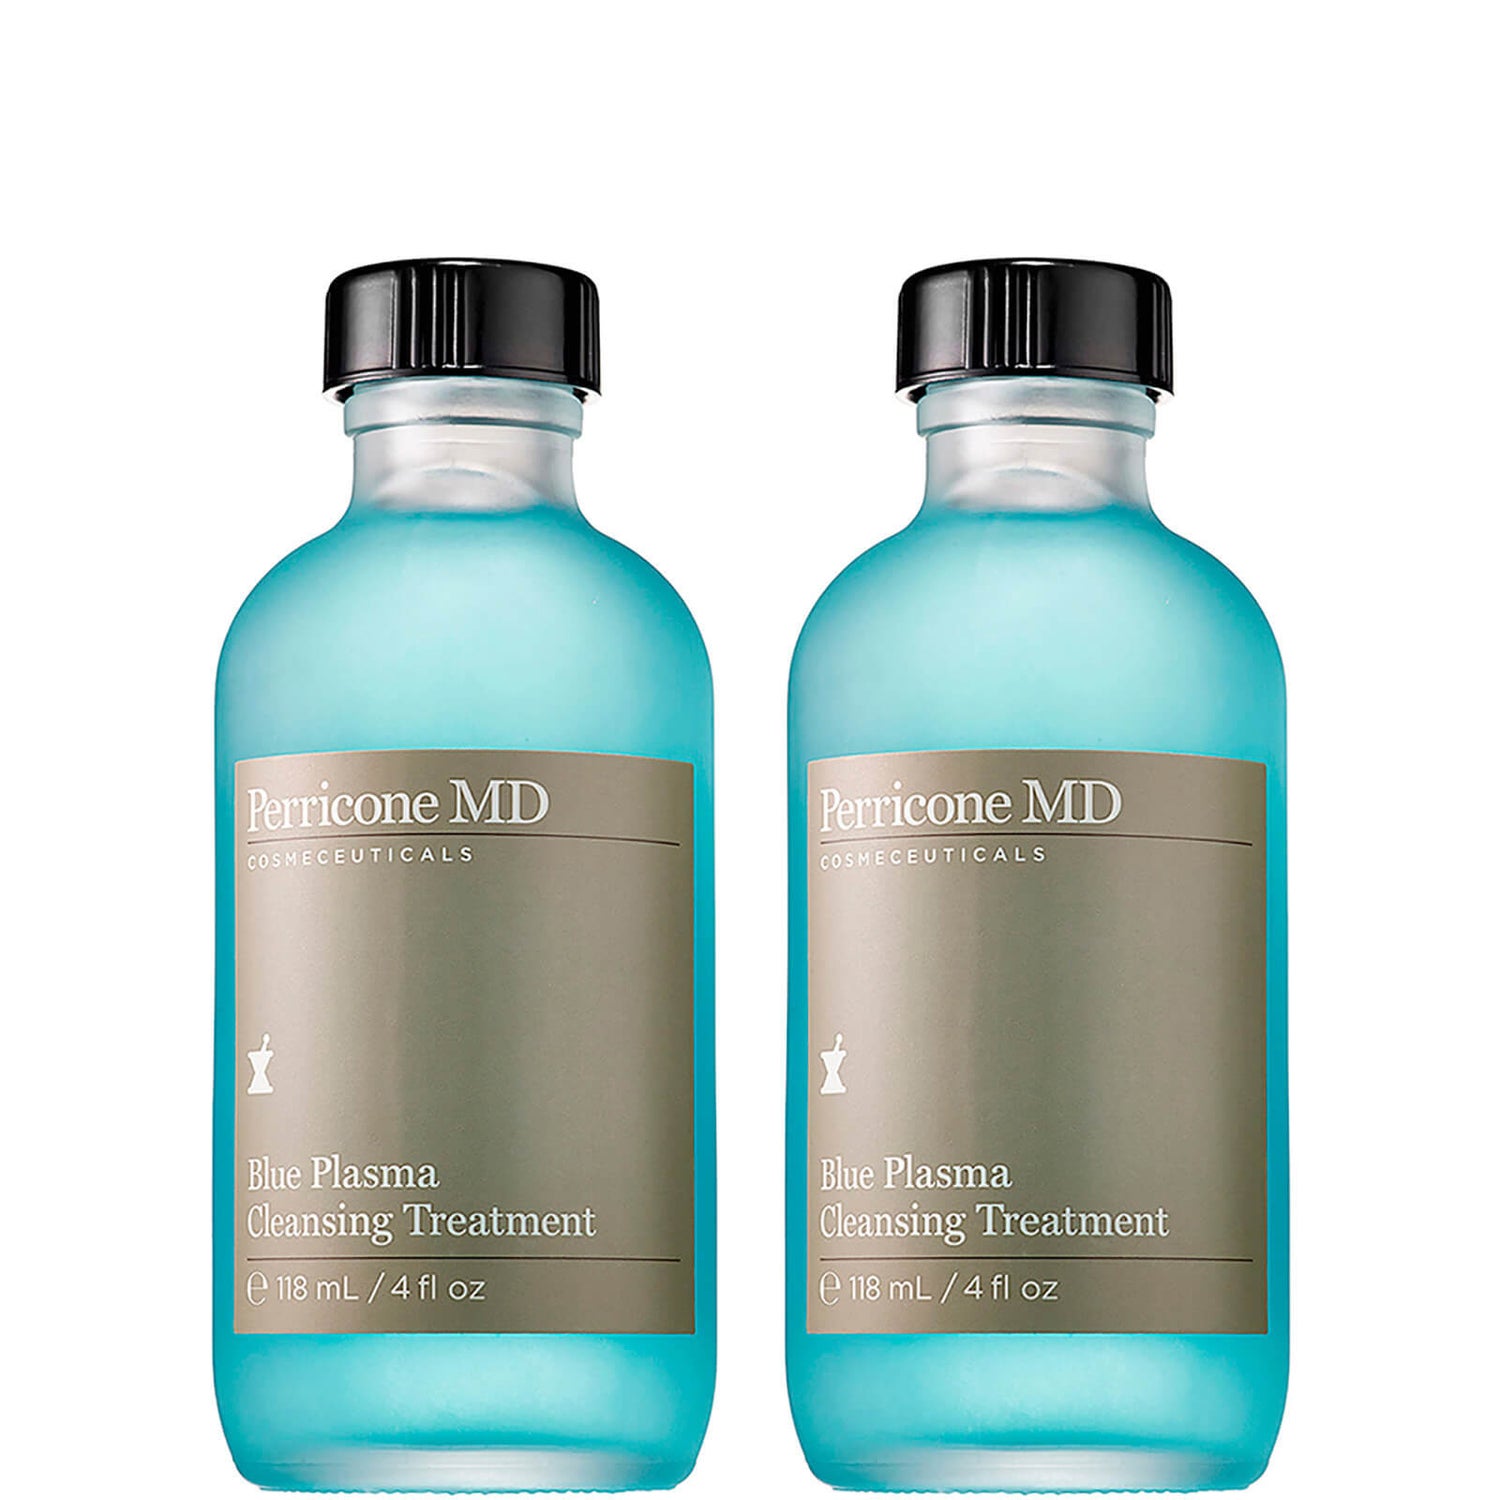 Perricone MD Blue Plasma Cleansing Treatment - Value Duo